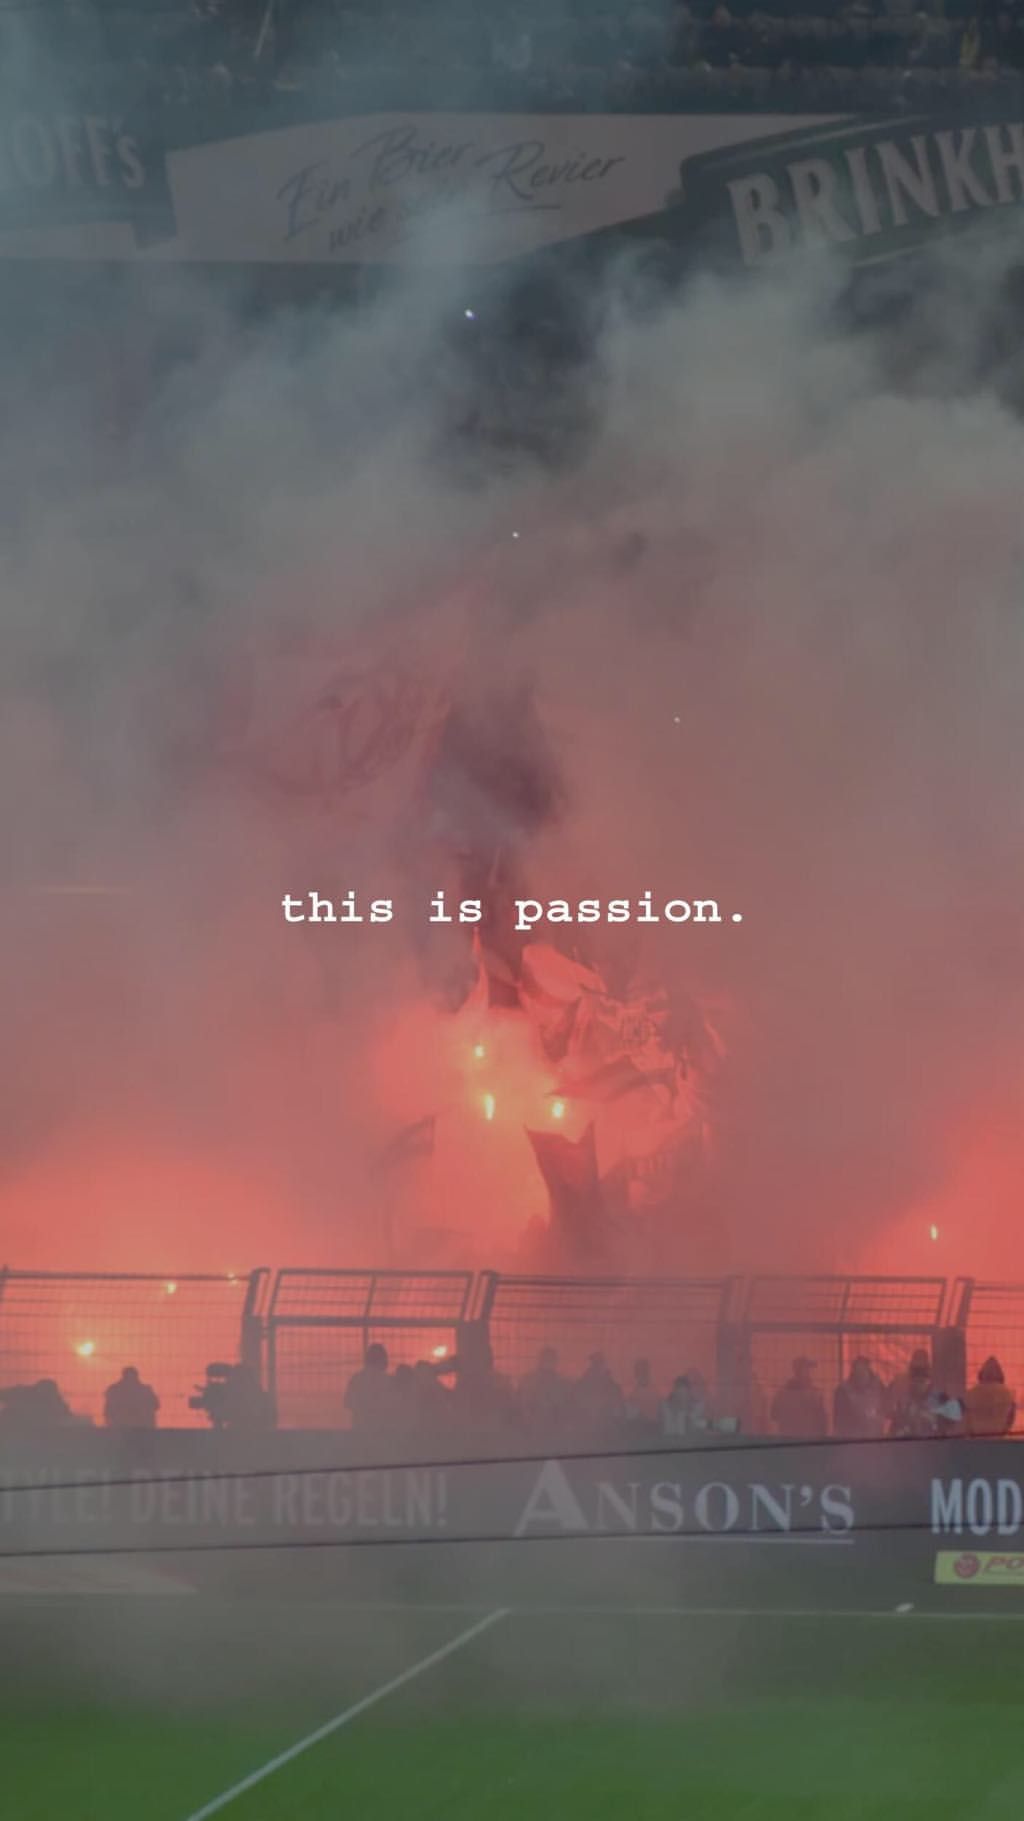 This is passion. - Soccer